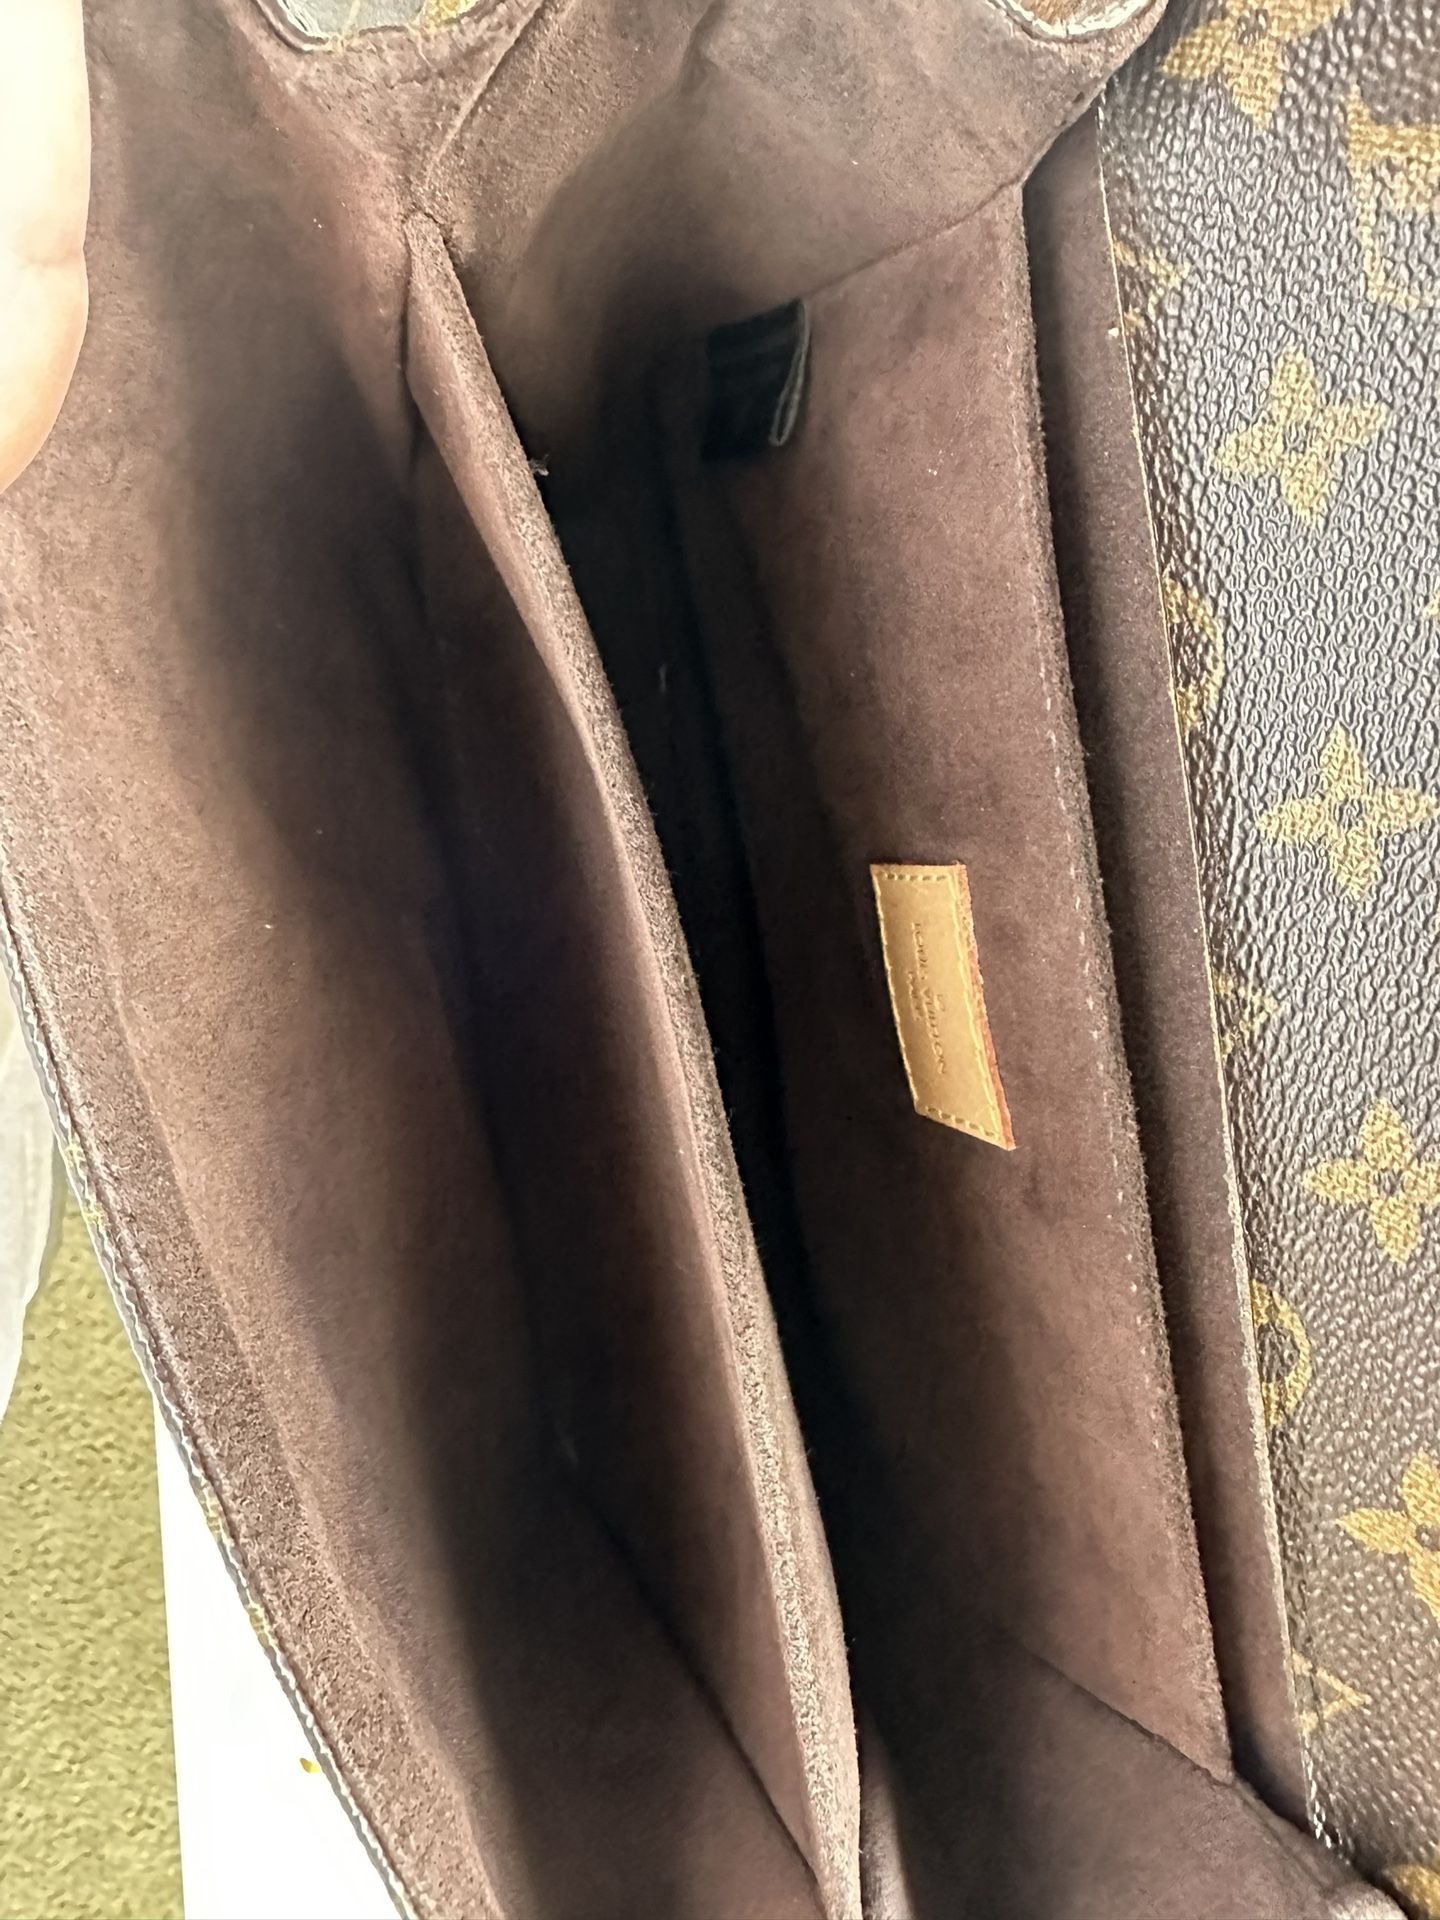 LV Purse $750 for Sale in Rancho Cucamonga, CA - OfferUp